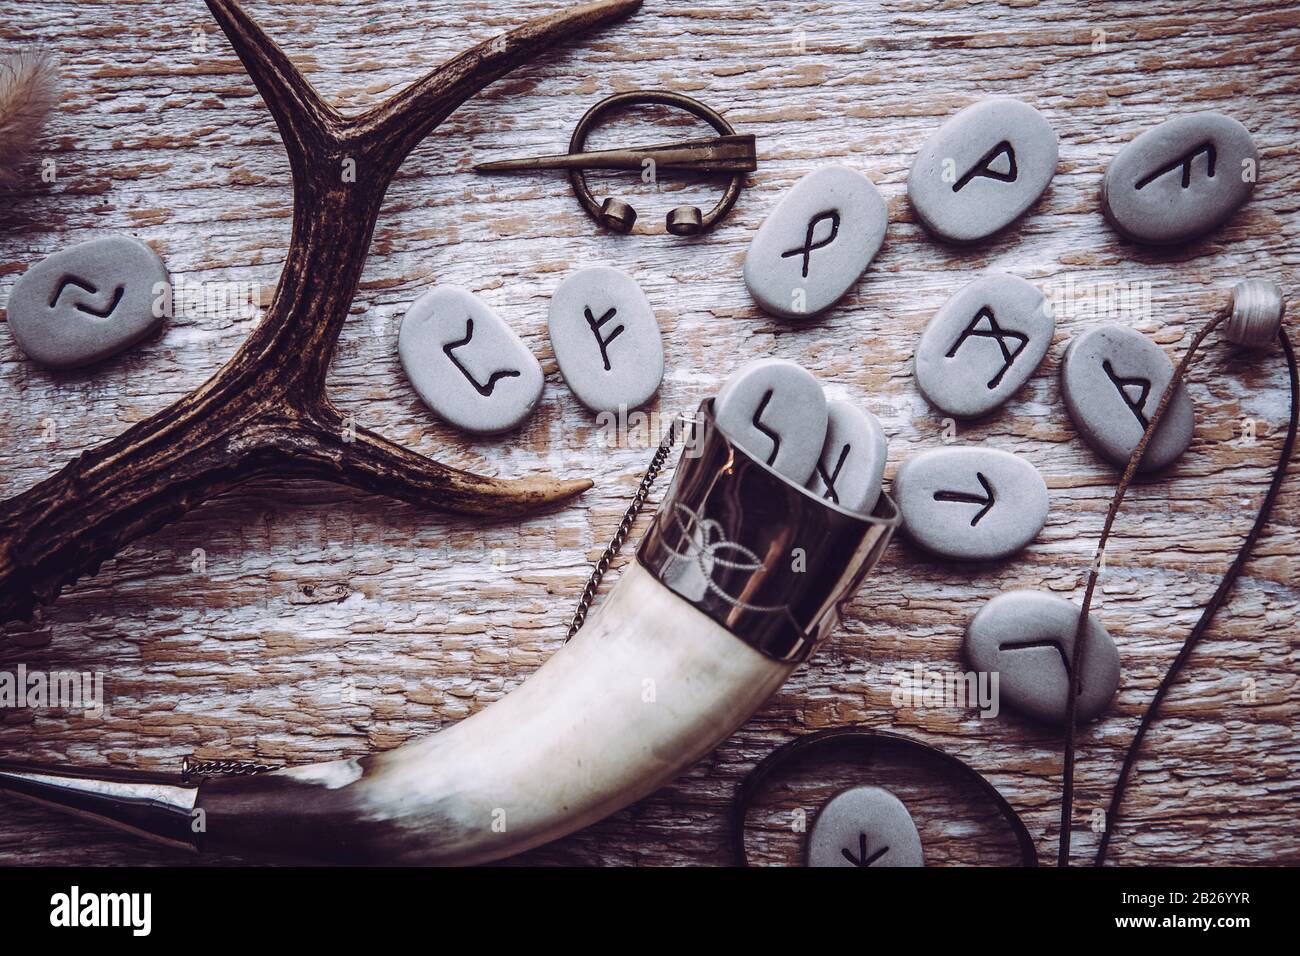 Flat lay view of rune stones with various viking era style objects. Ancient divination and vikings lifestyle concept. Stock Photo